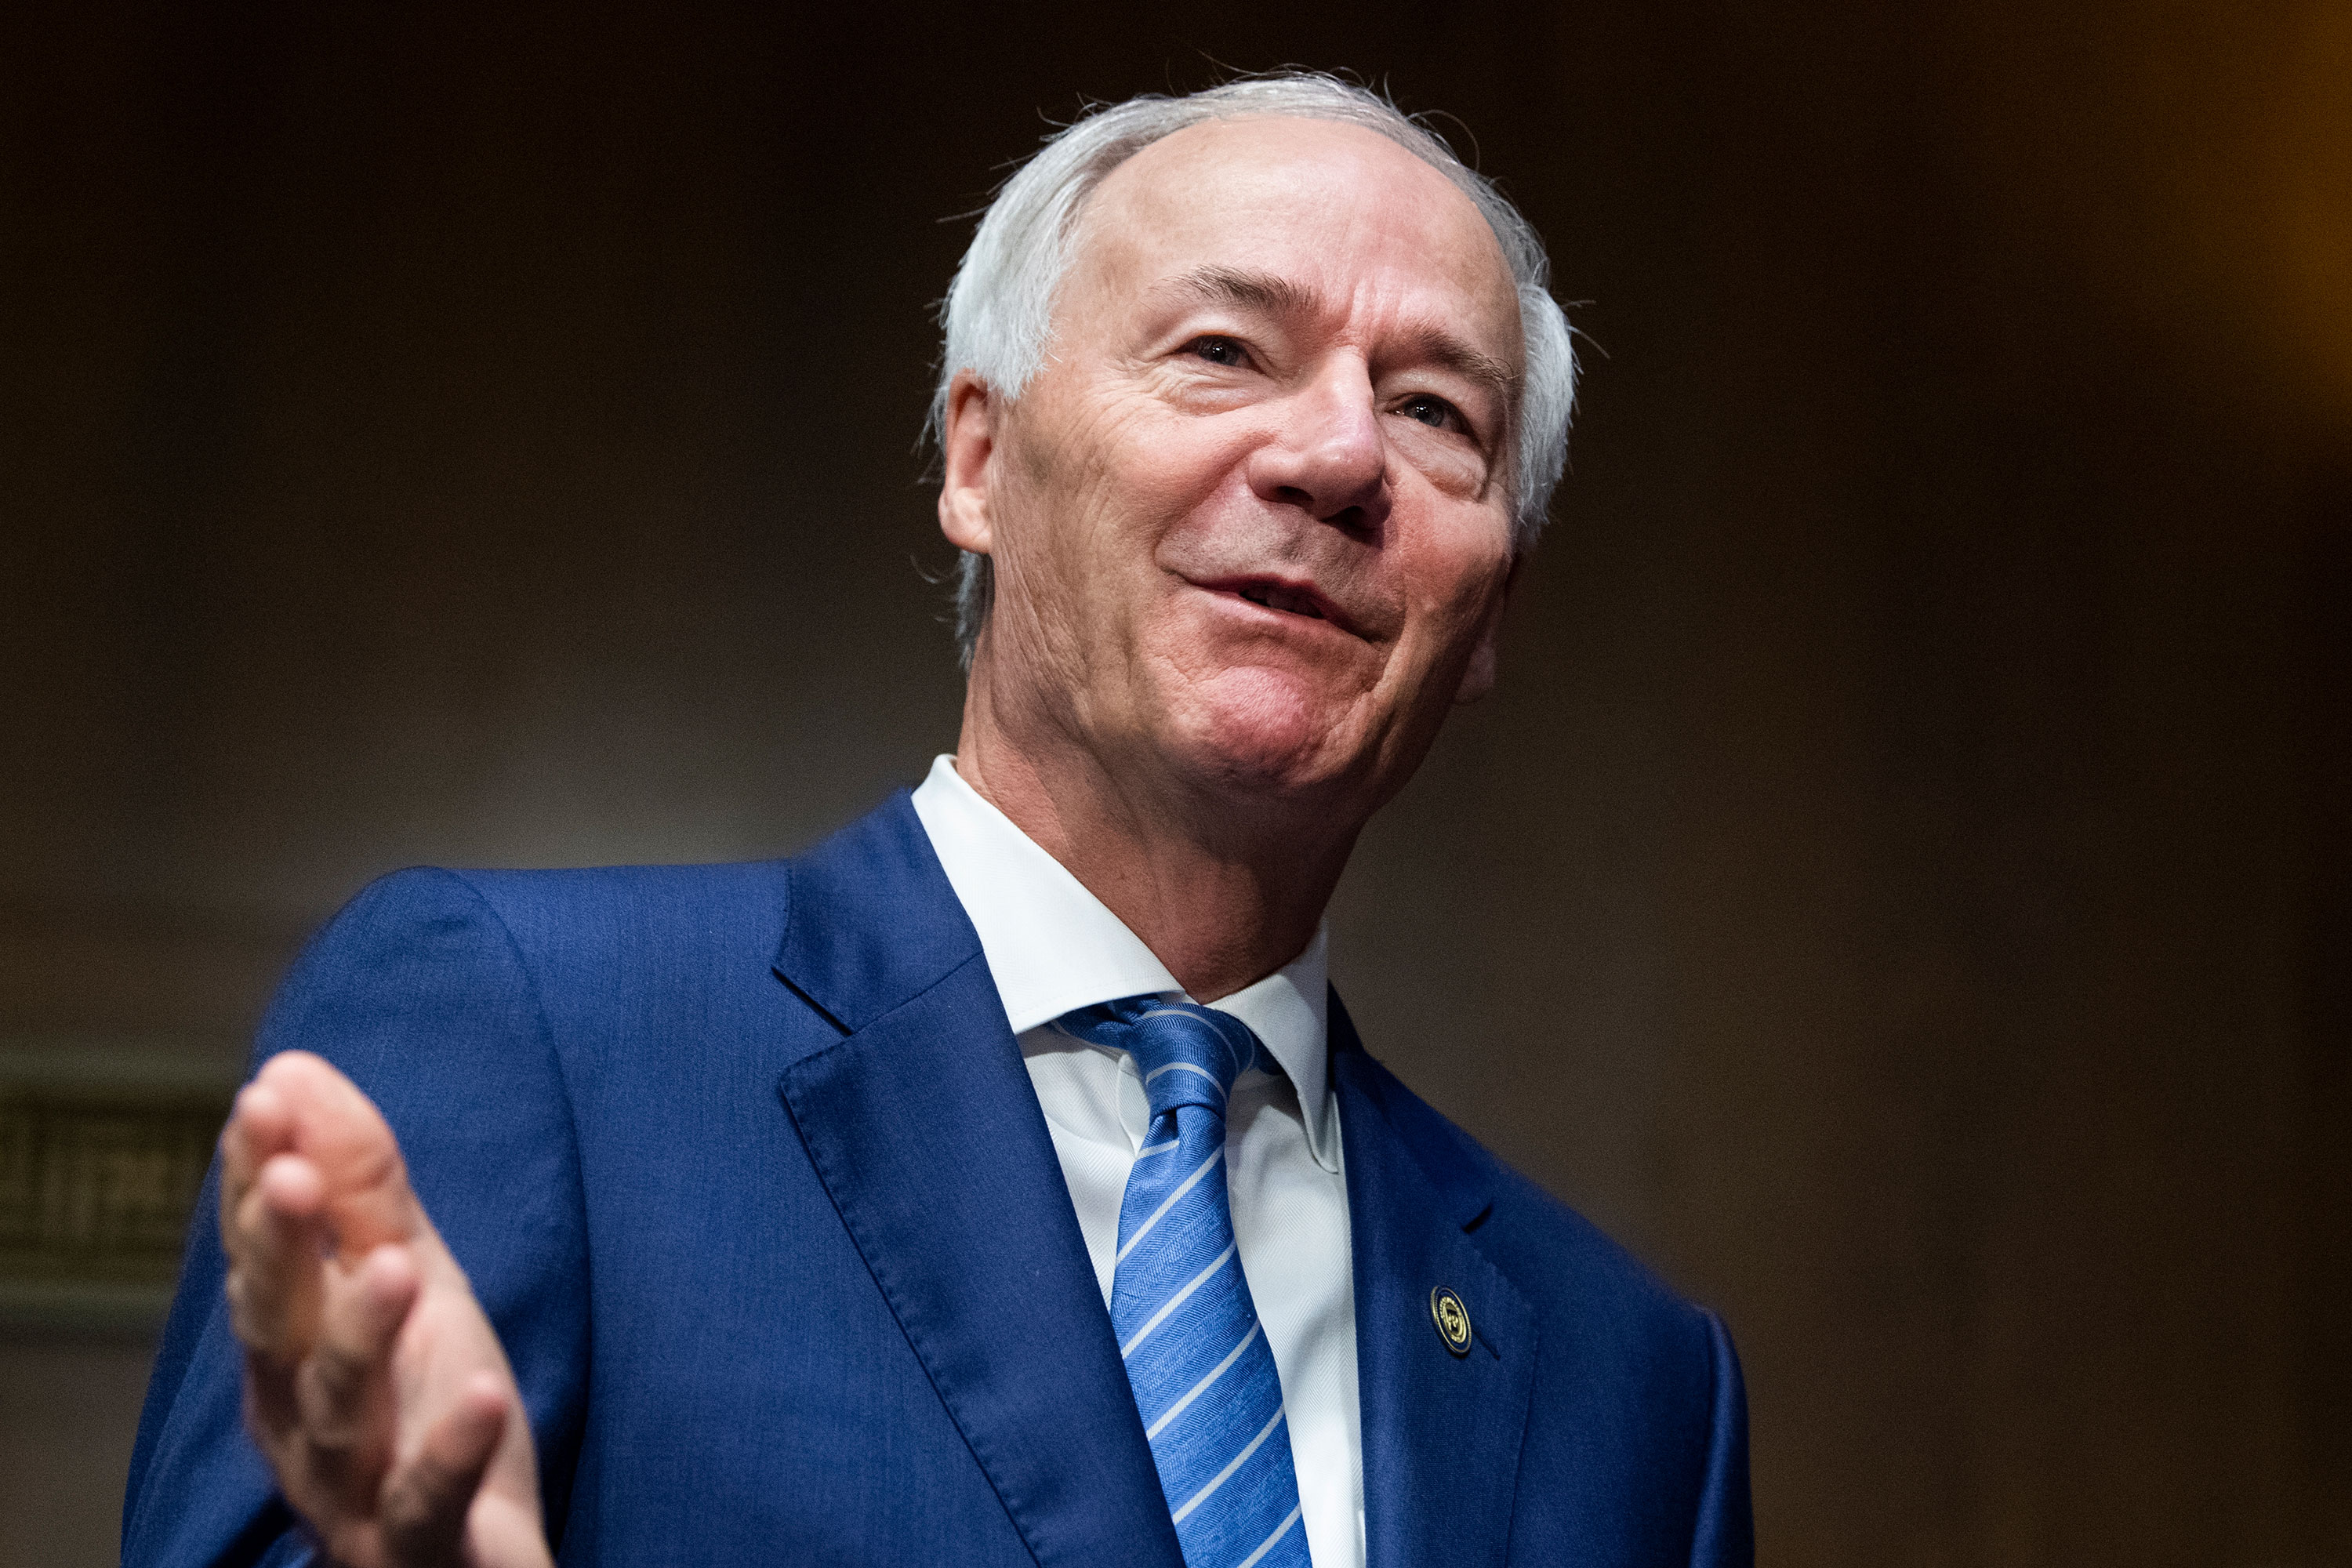 GOP Arkansas governor says he's 'very seriously' considering 2024